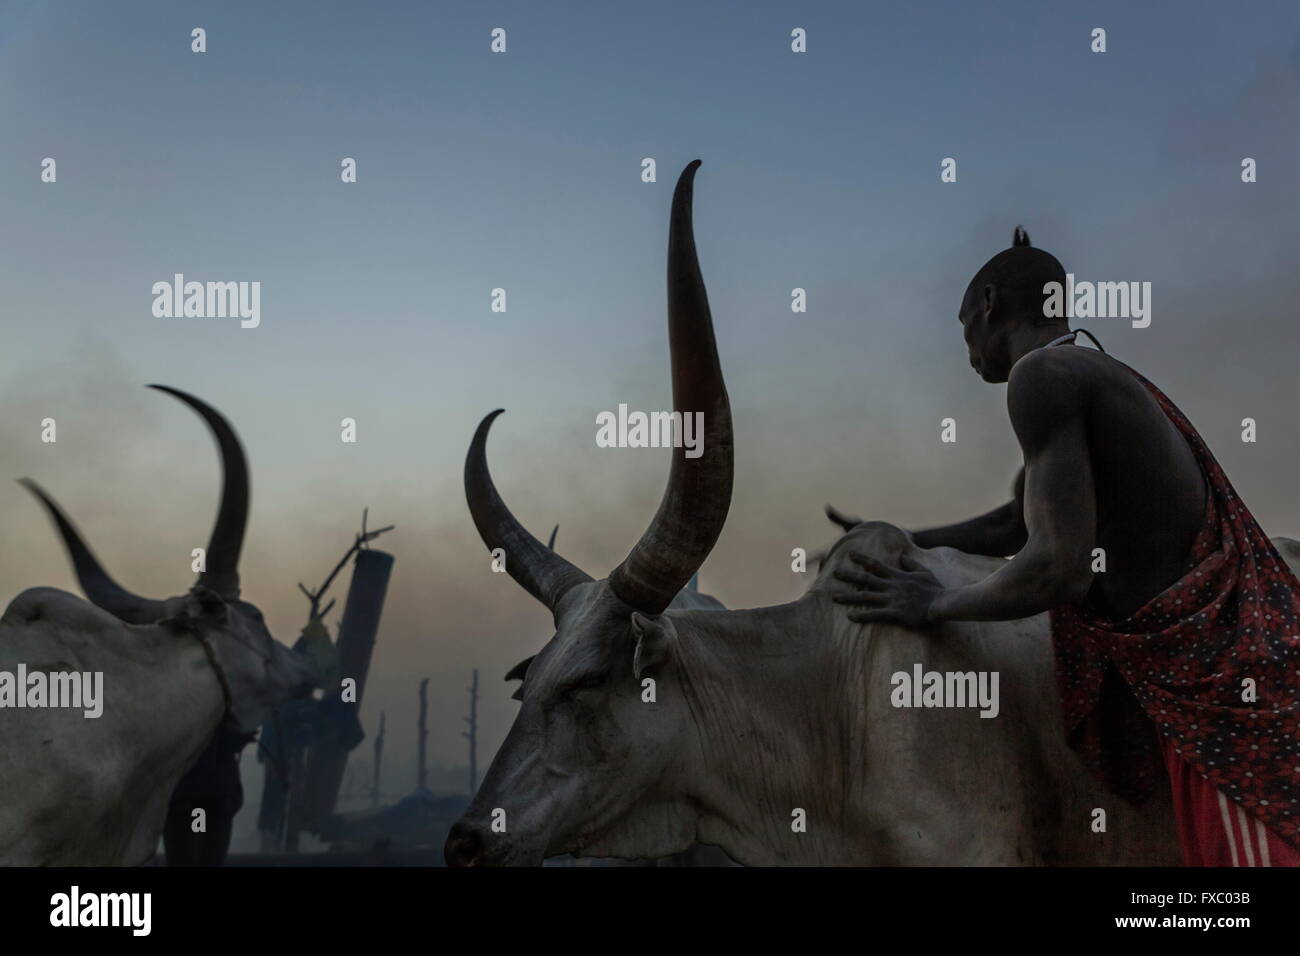 South Sudan. 20th Feb, 2016. A Mundari man washes his cows with ash to protect them from insects during the night. The camp drums can be seen in the background. Ankole-Watusi, also known as Ankole Longhorn, or 'Cattle of Kings' is a 900 to 1,600 pound landrace breed of cattle originally native to Africa with distinctive horns that can reach up to 8 ft tall. © Tariq Zaidi/ZUMA Wire/ZUMAPRESS.com/Alamy Live News Stock Photo